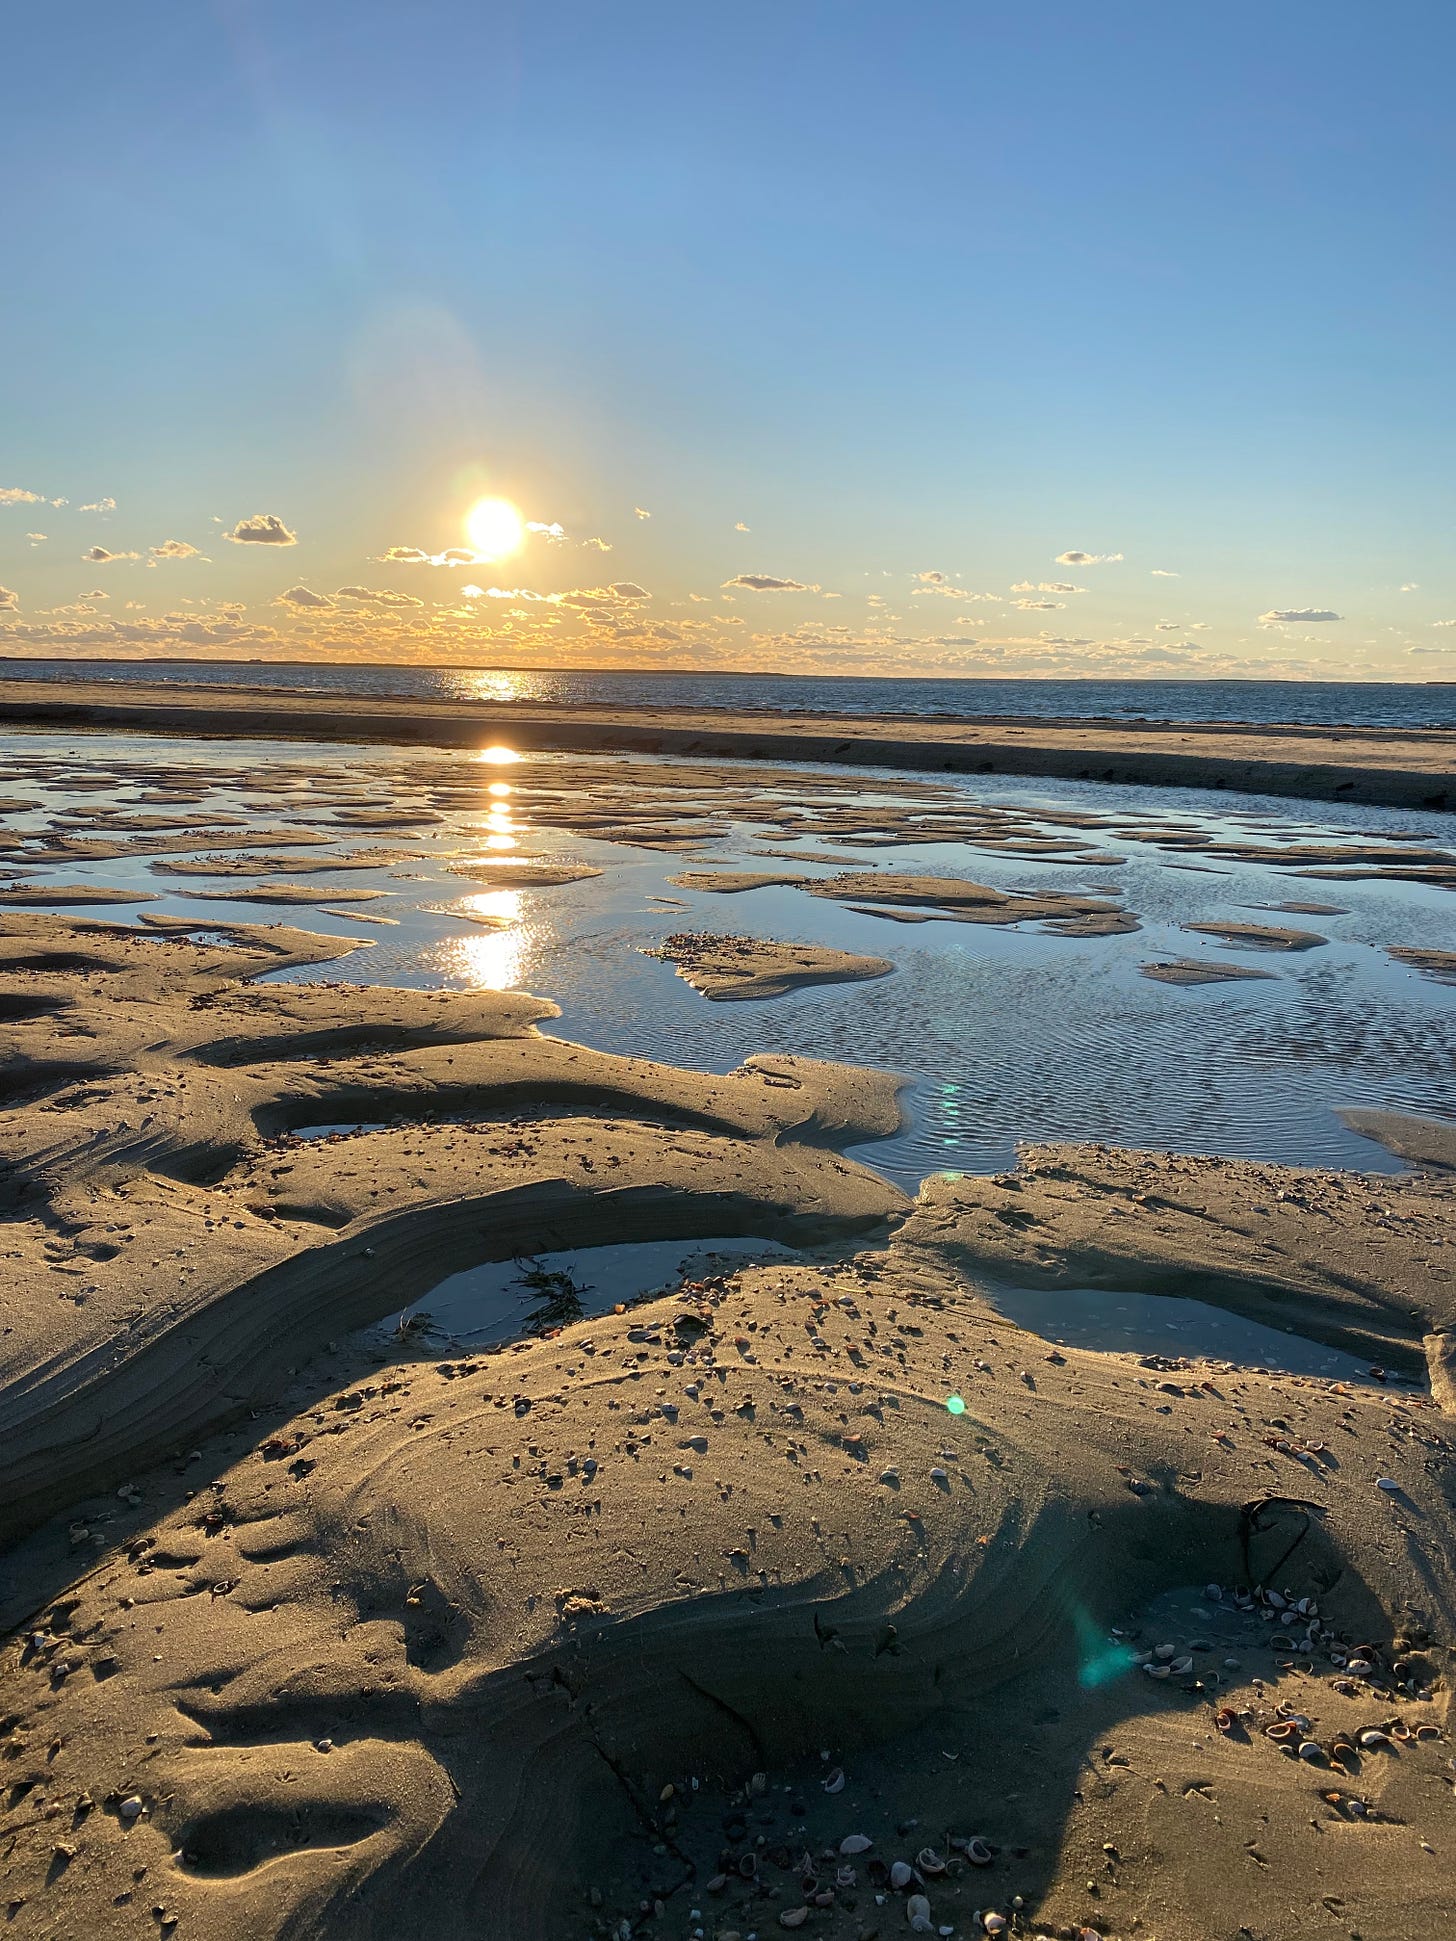 The sun is low in a clear blue sky, reflecting on the ocean. The sand makes small tide pools on the sand, with little islands of beach surrounded by glinting water.